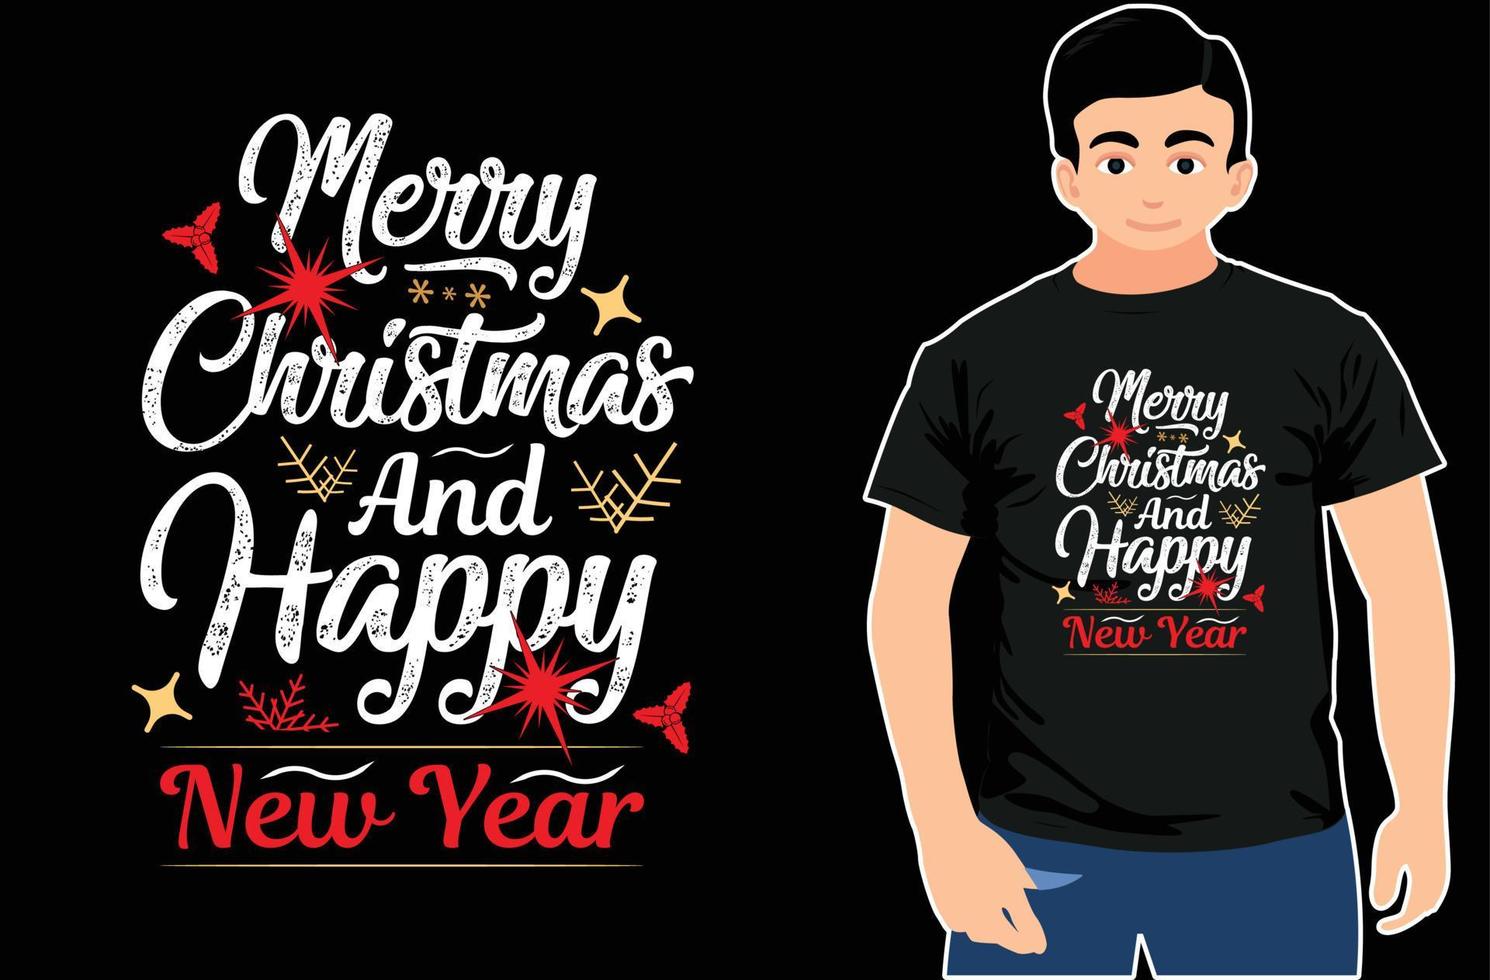 Merry Christmas And Happy New Year. Holiday Christmas T-shirt Design. Typography Vector Design.